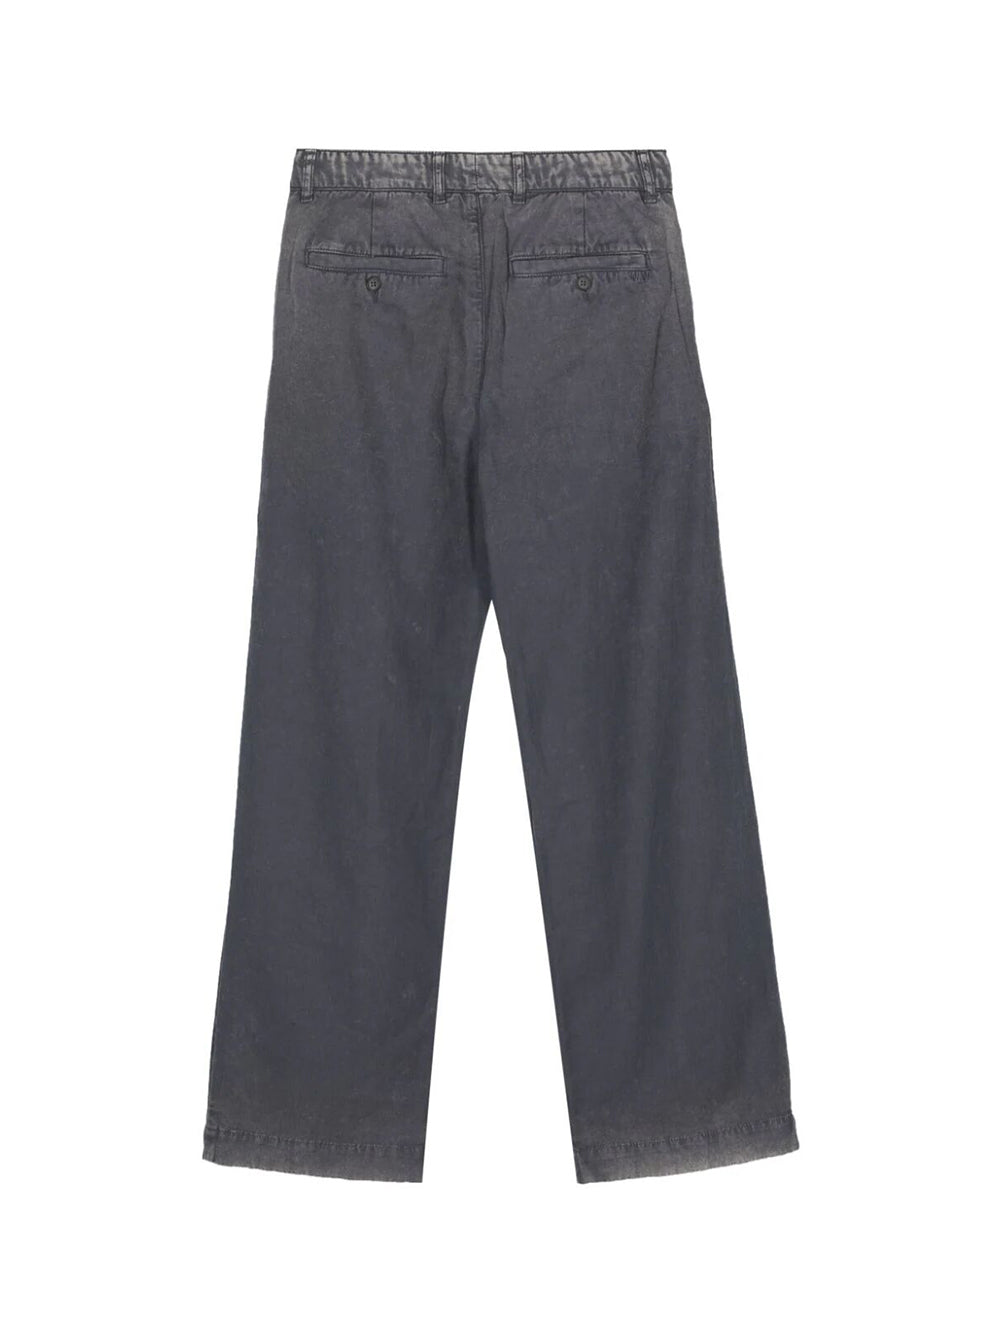 Fraser Pleated Chino trouser